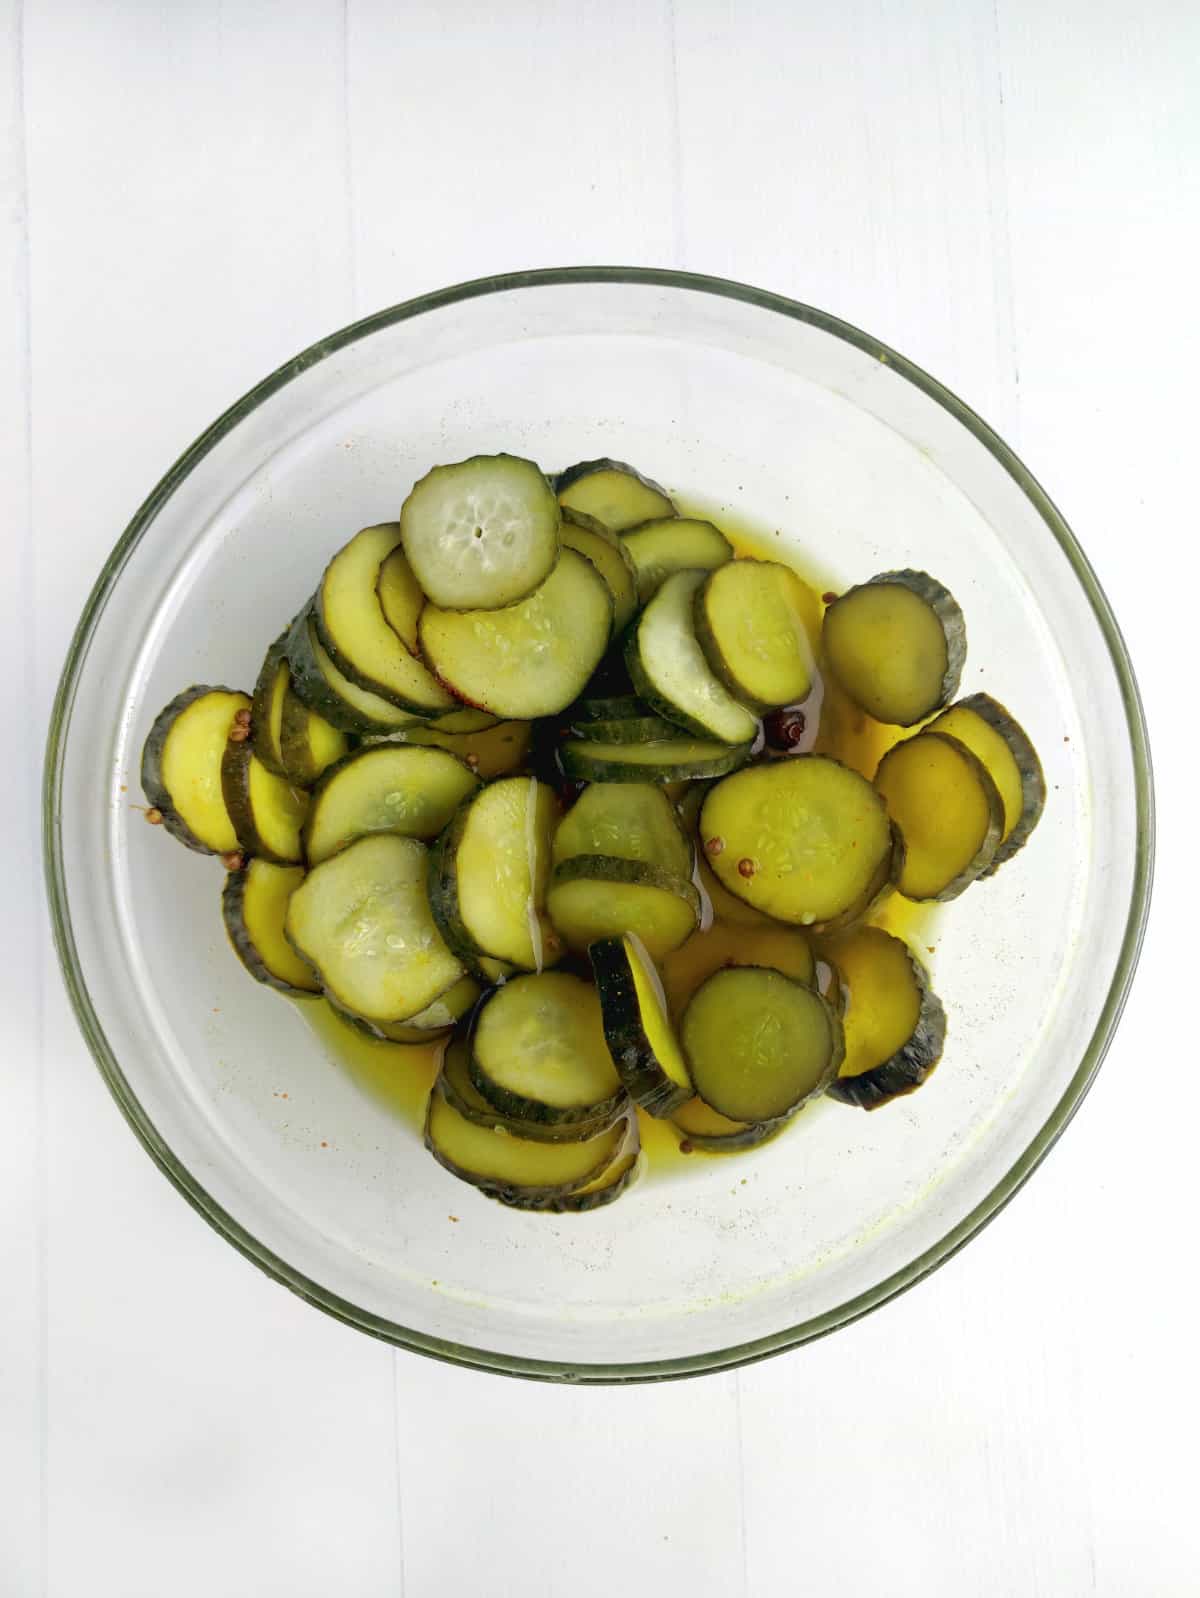 bowl of cured cucumber slices into sweet pickle slices or chips.